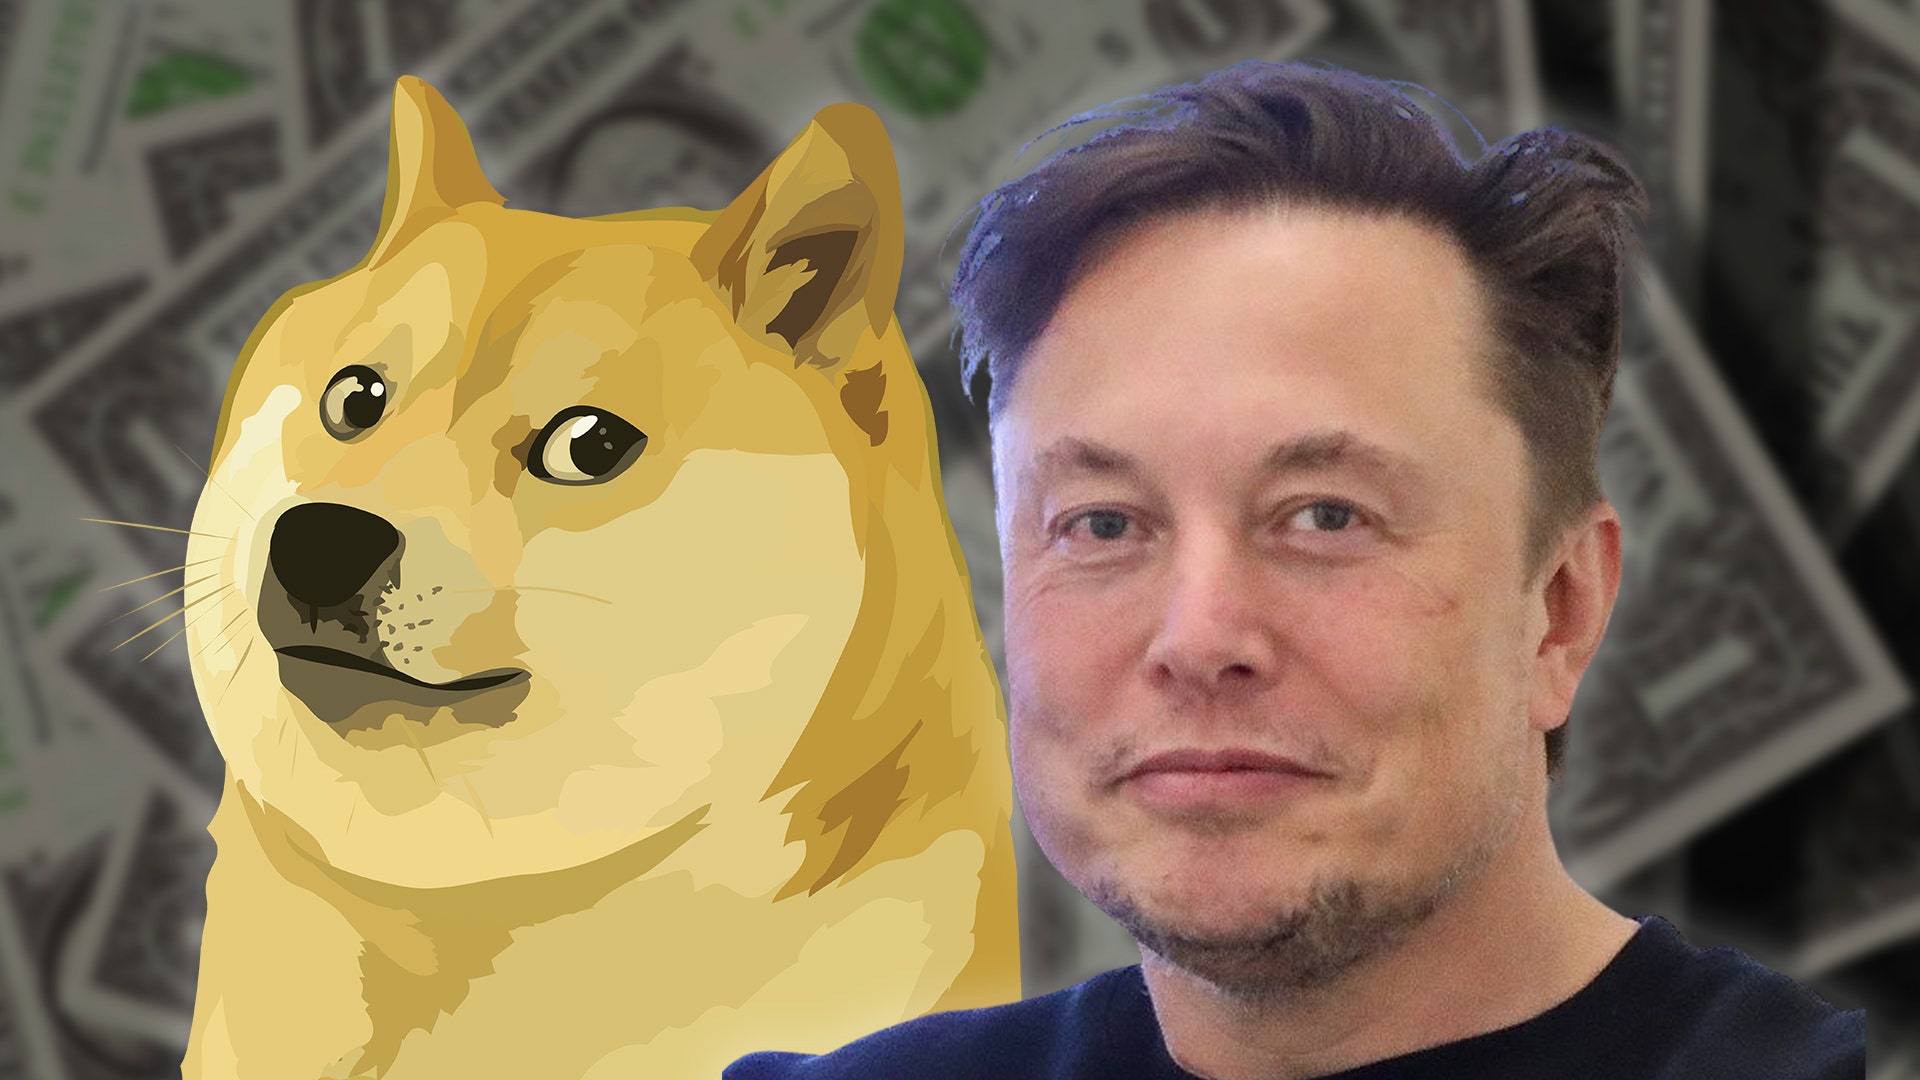 If You Invested $100 When Elon Musk First Tweeted About Dogecoin, Here's How Much You'd Have Now